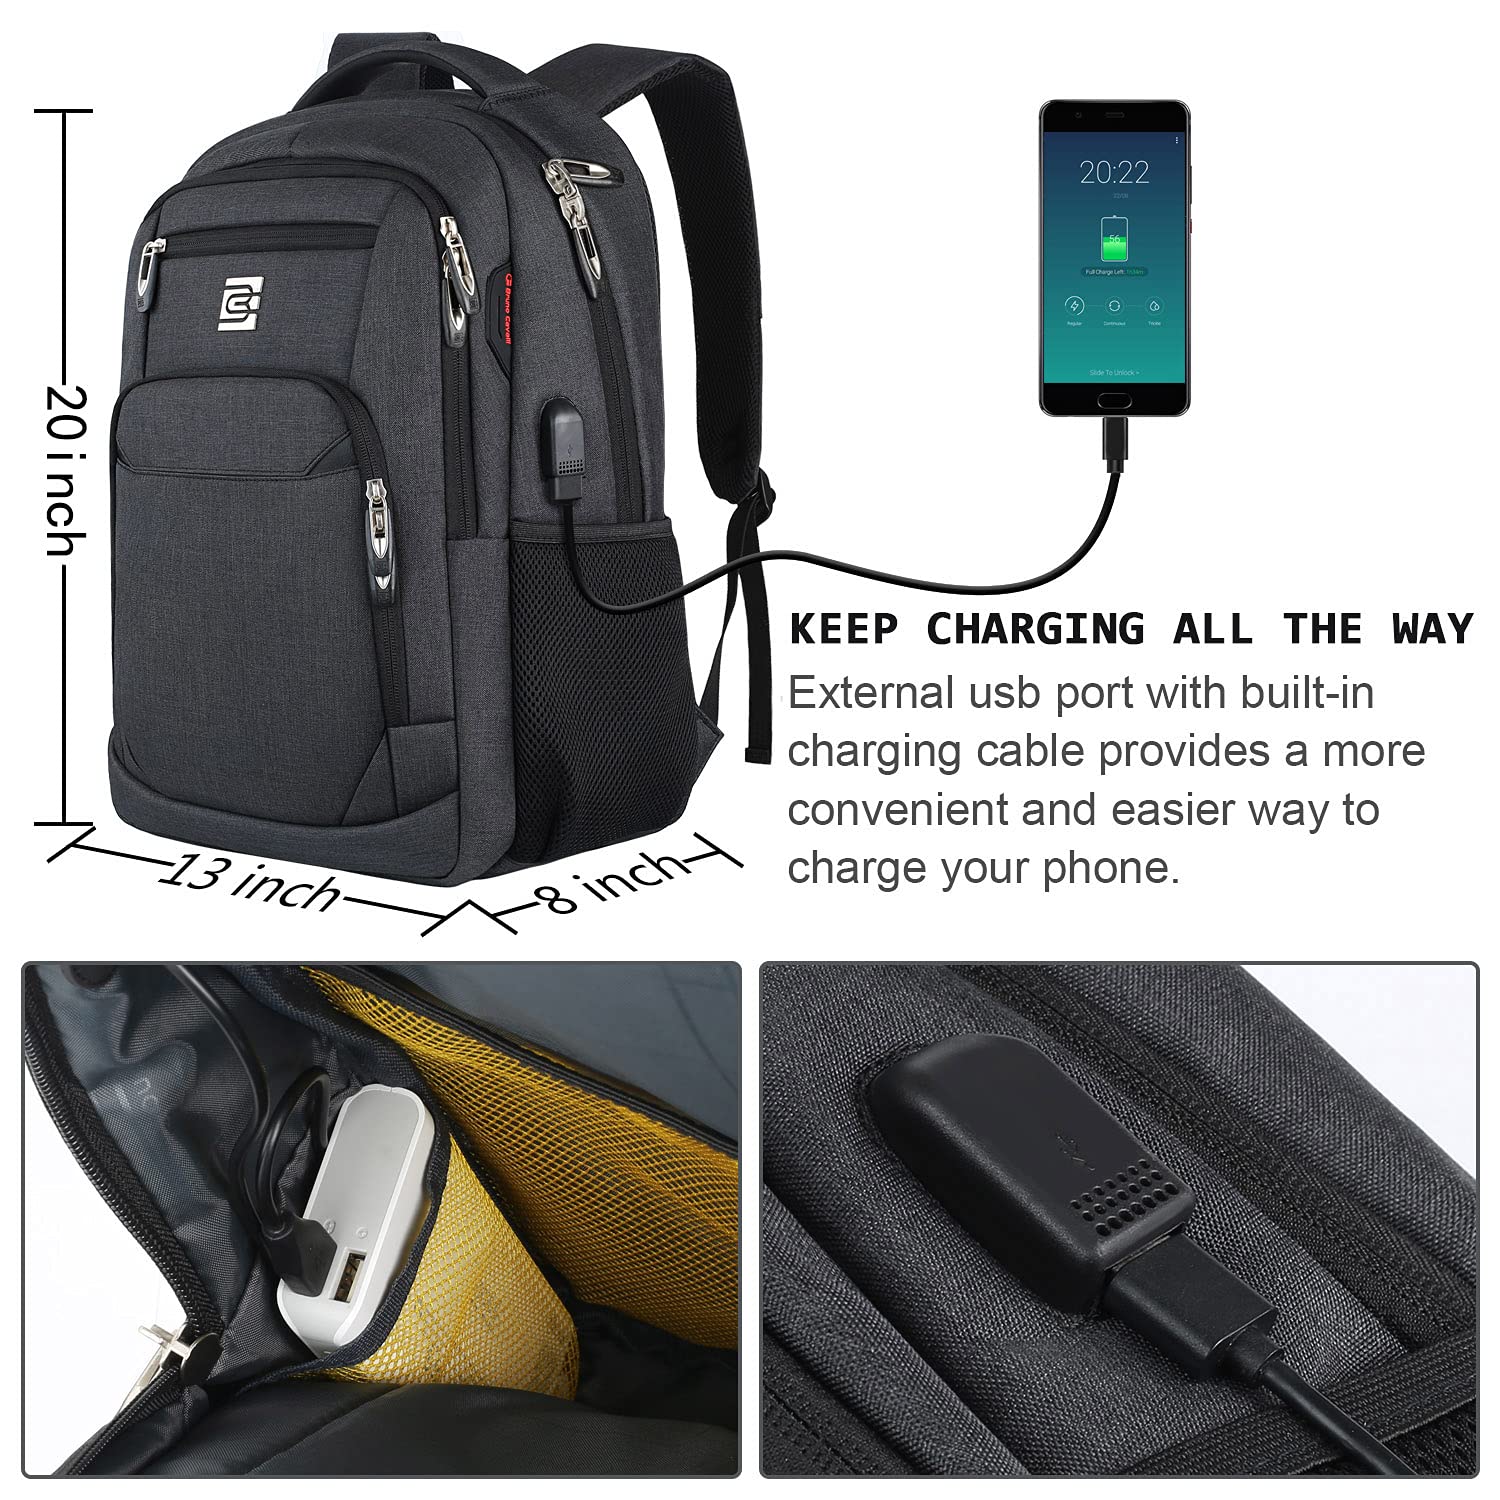 17 Inch Laptop Backpack, Business Anti Theft Slim Durable Laptops Backpack with USB Charging Port, Water Resistant College Computer Bag Gifts for Men & Women Fits 15.6 Inch Notebook-Black